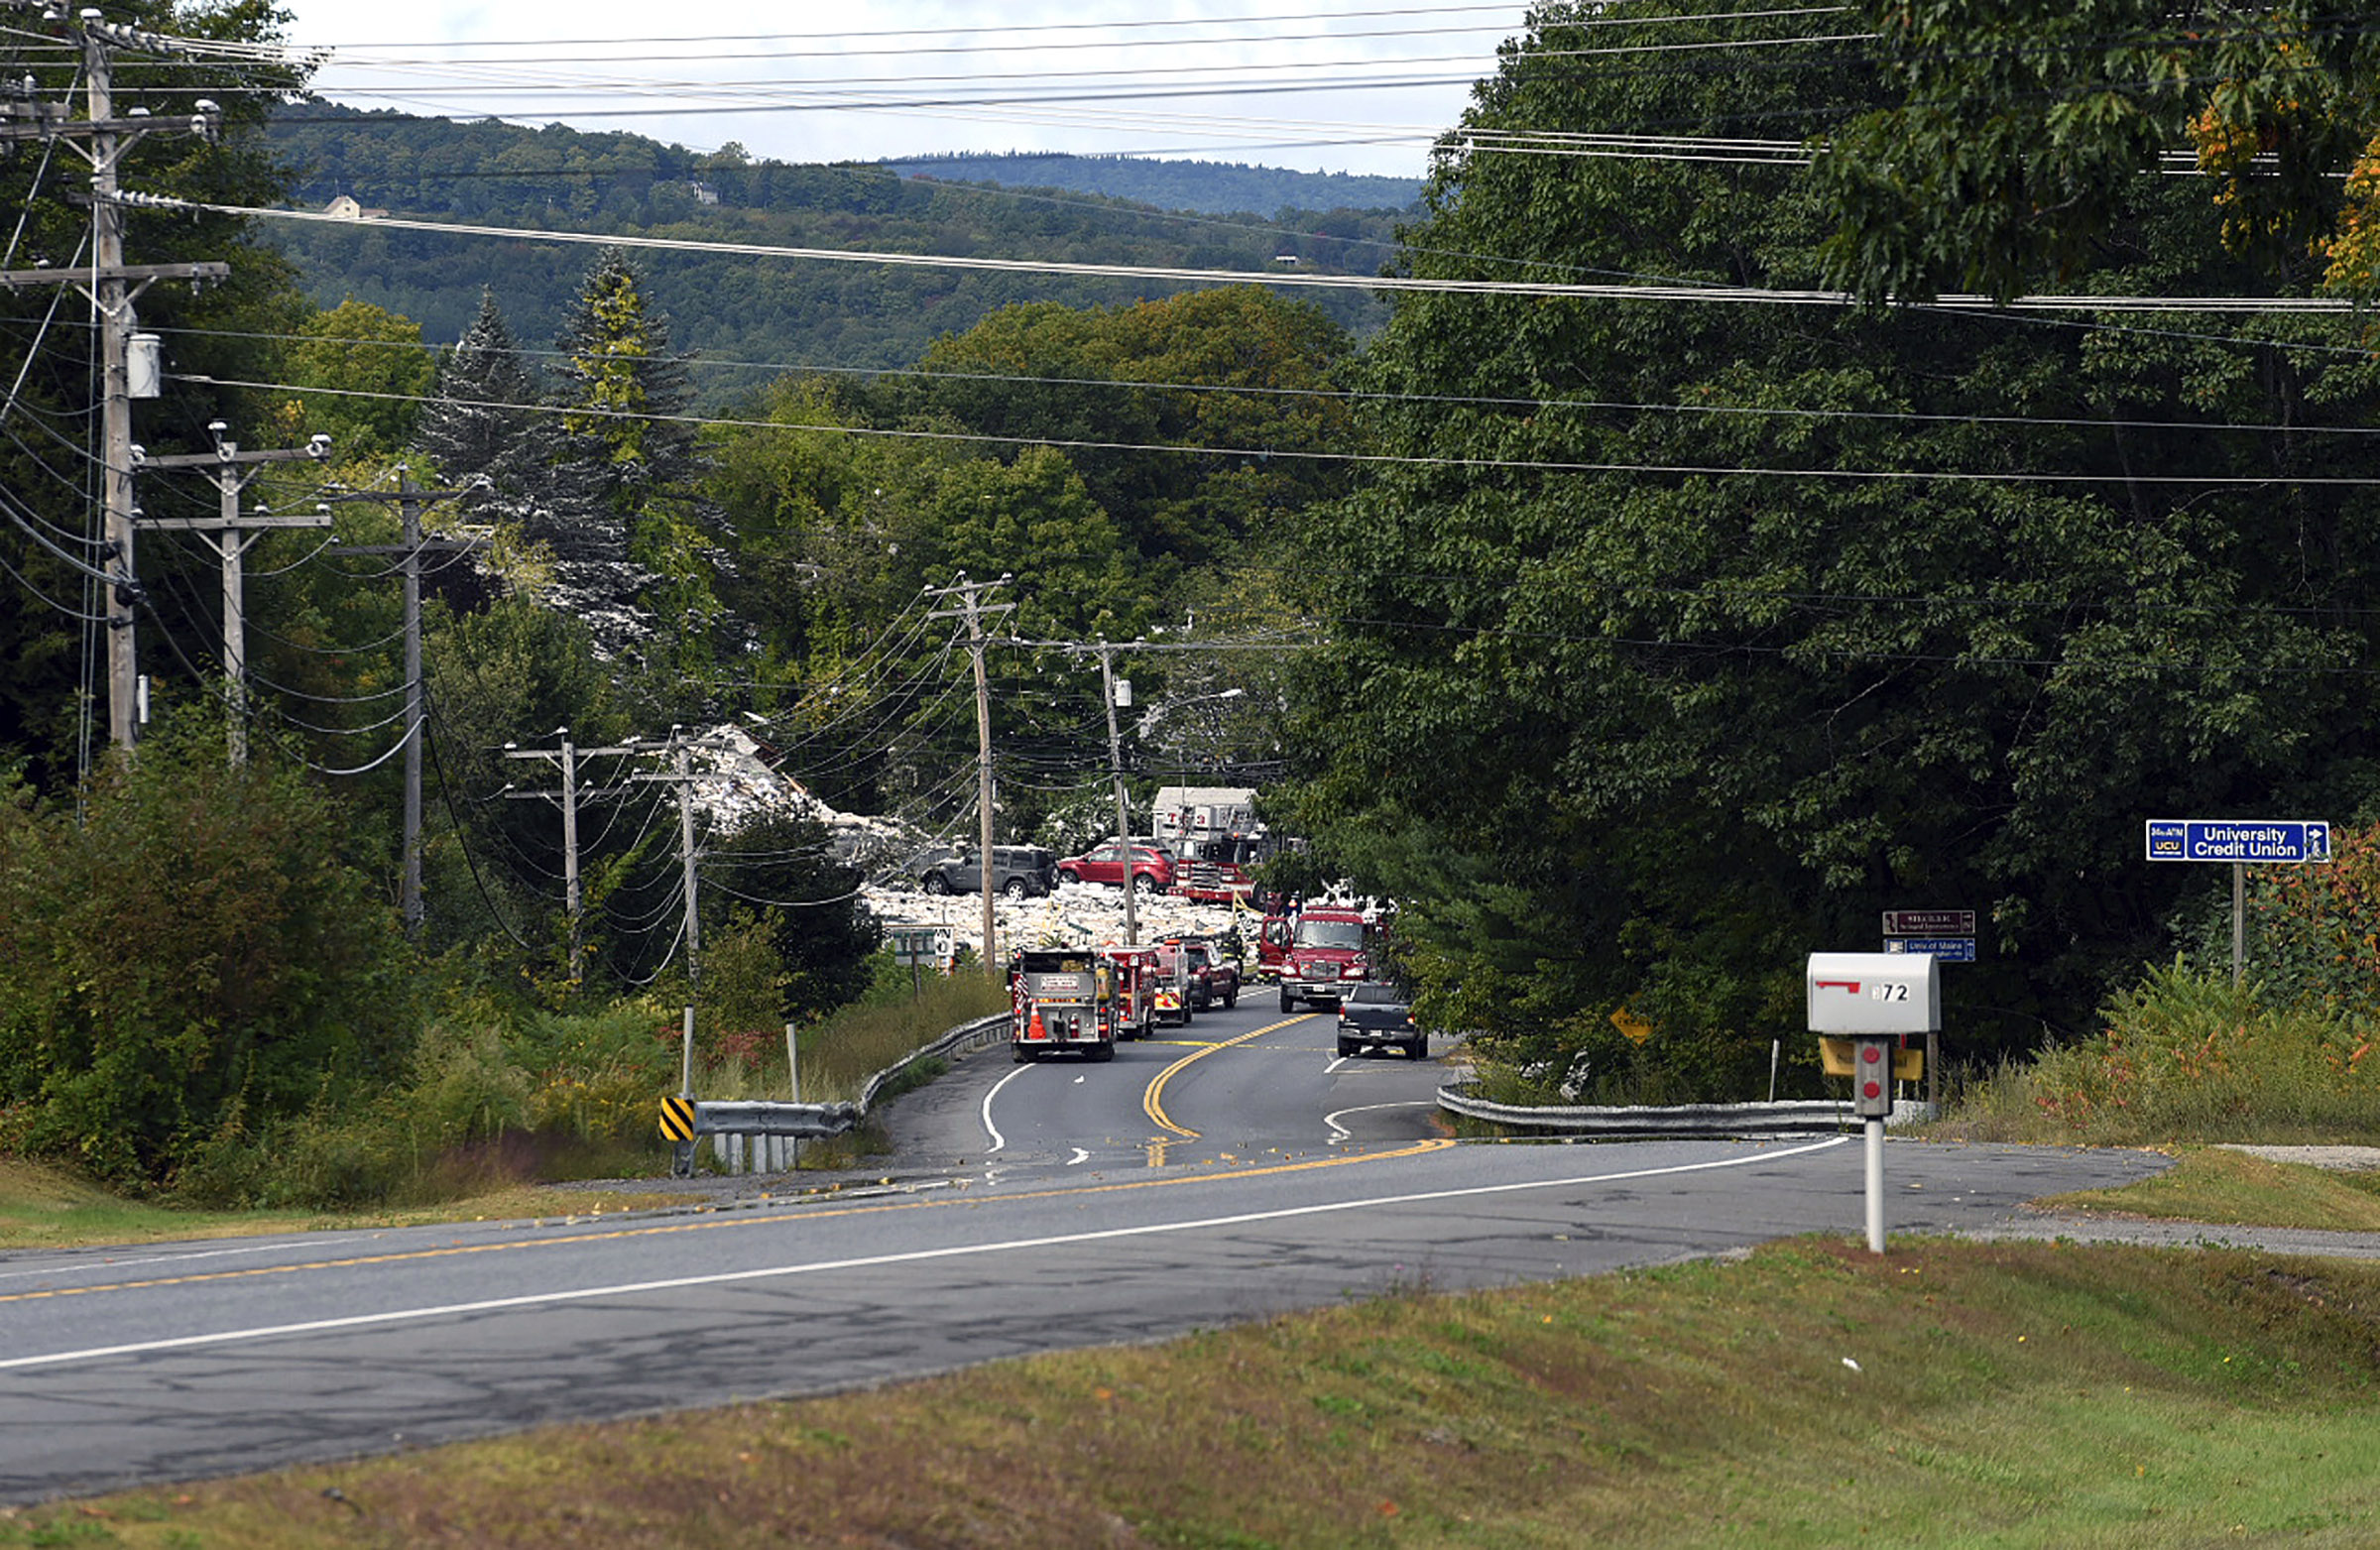 Emergency vehicles stand by on Sept. 16, 2019, at the scene of a deadly propane explosion which leveled new construction in Farmington, Maine. (Russ Dillingham—AP)